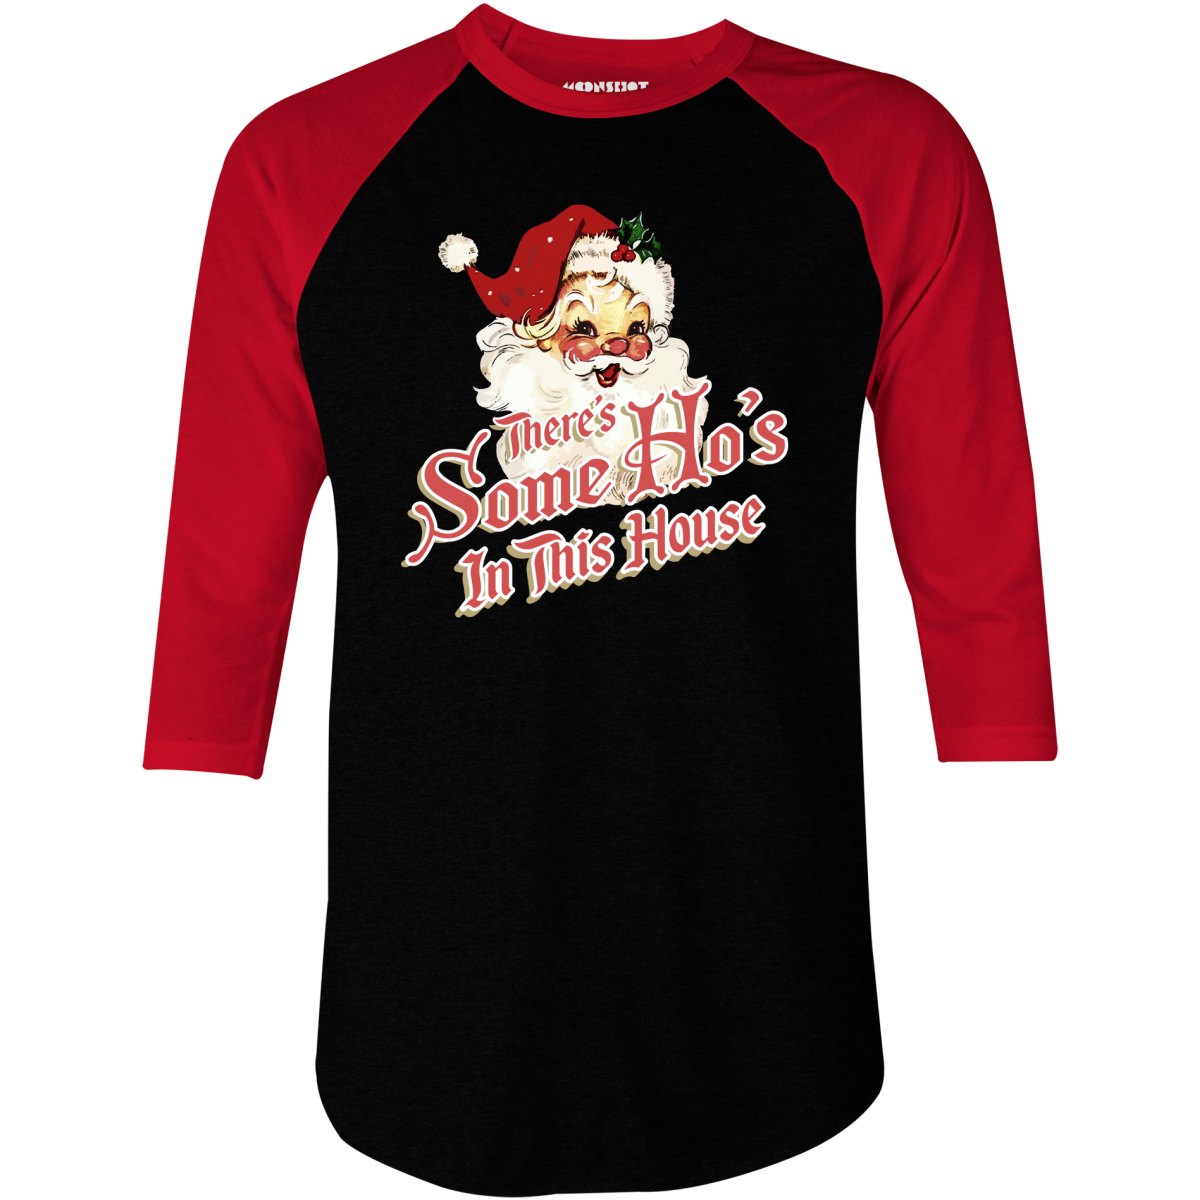 There's Some Ho's in this House - 3/4 Sleeve Raglan T-Shirt